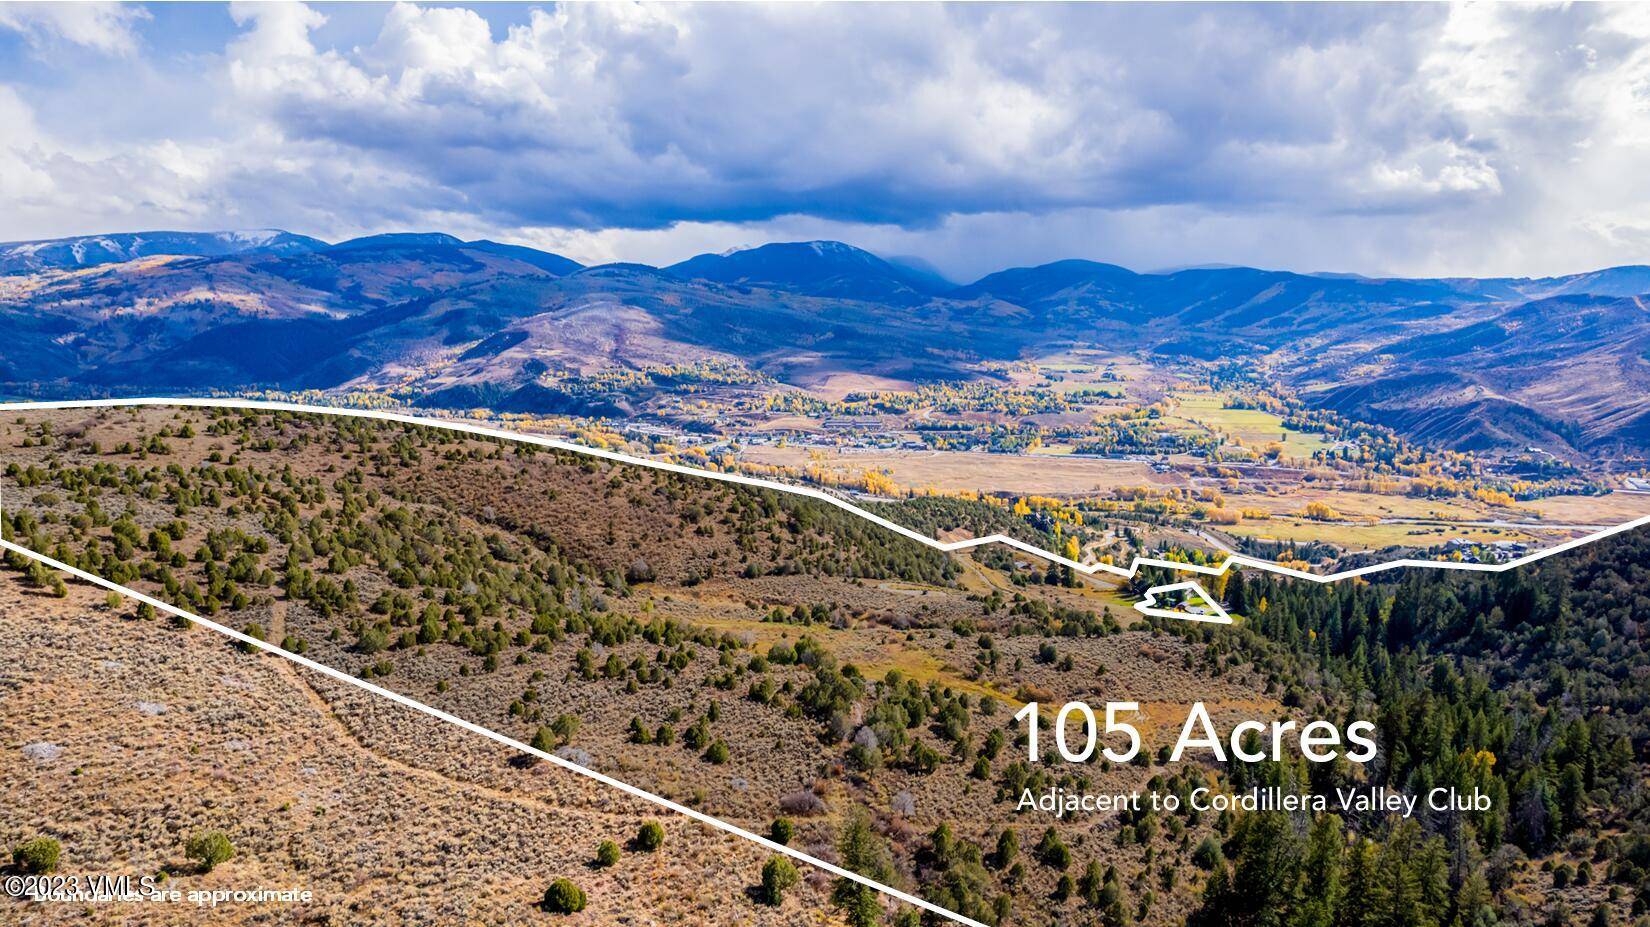 A rare central development opportunity adjacent to Cordillera Valley Club, this 113.